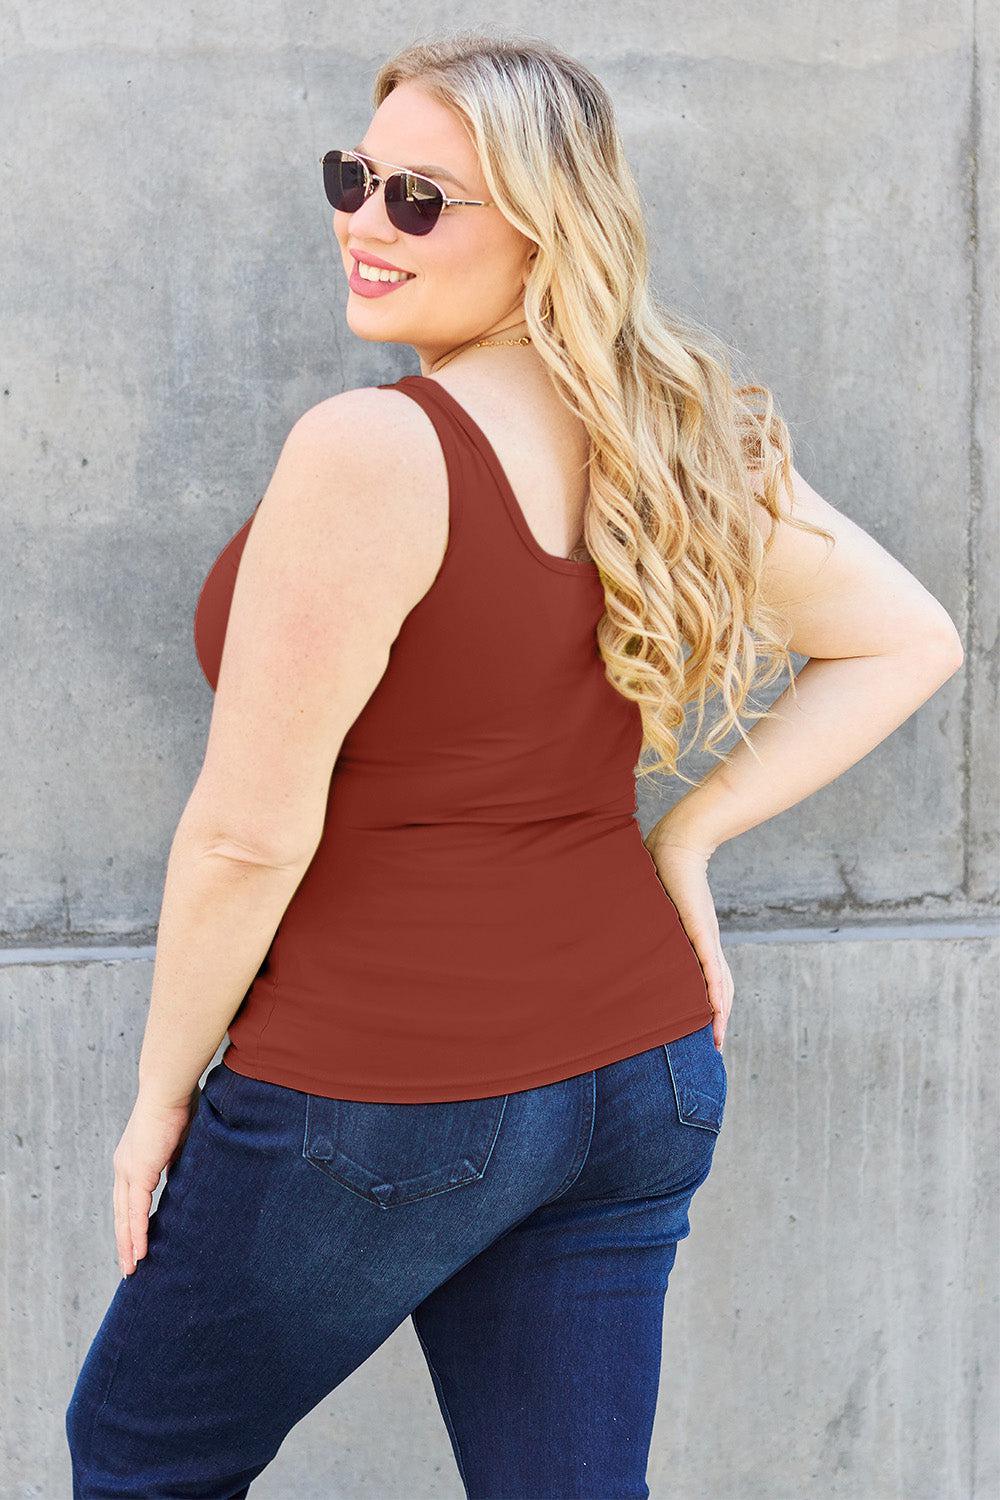 a woman wearing a brown tank top and jeans